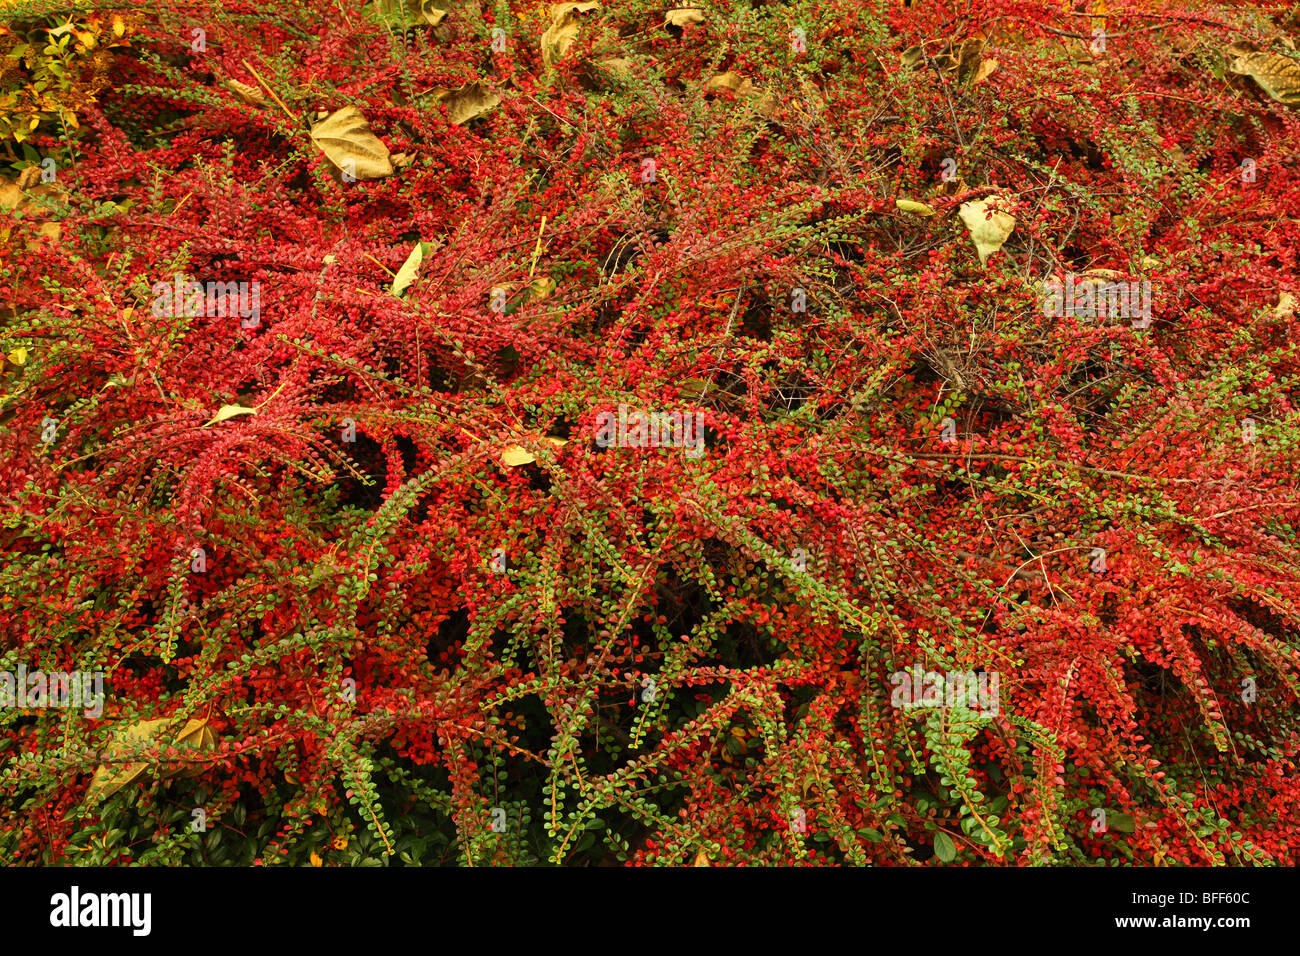 Cotoneaster shrub at fall with red berries Cotoneaster horizontalis Stock Photo